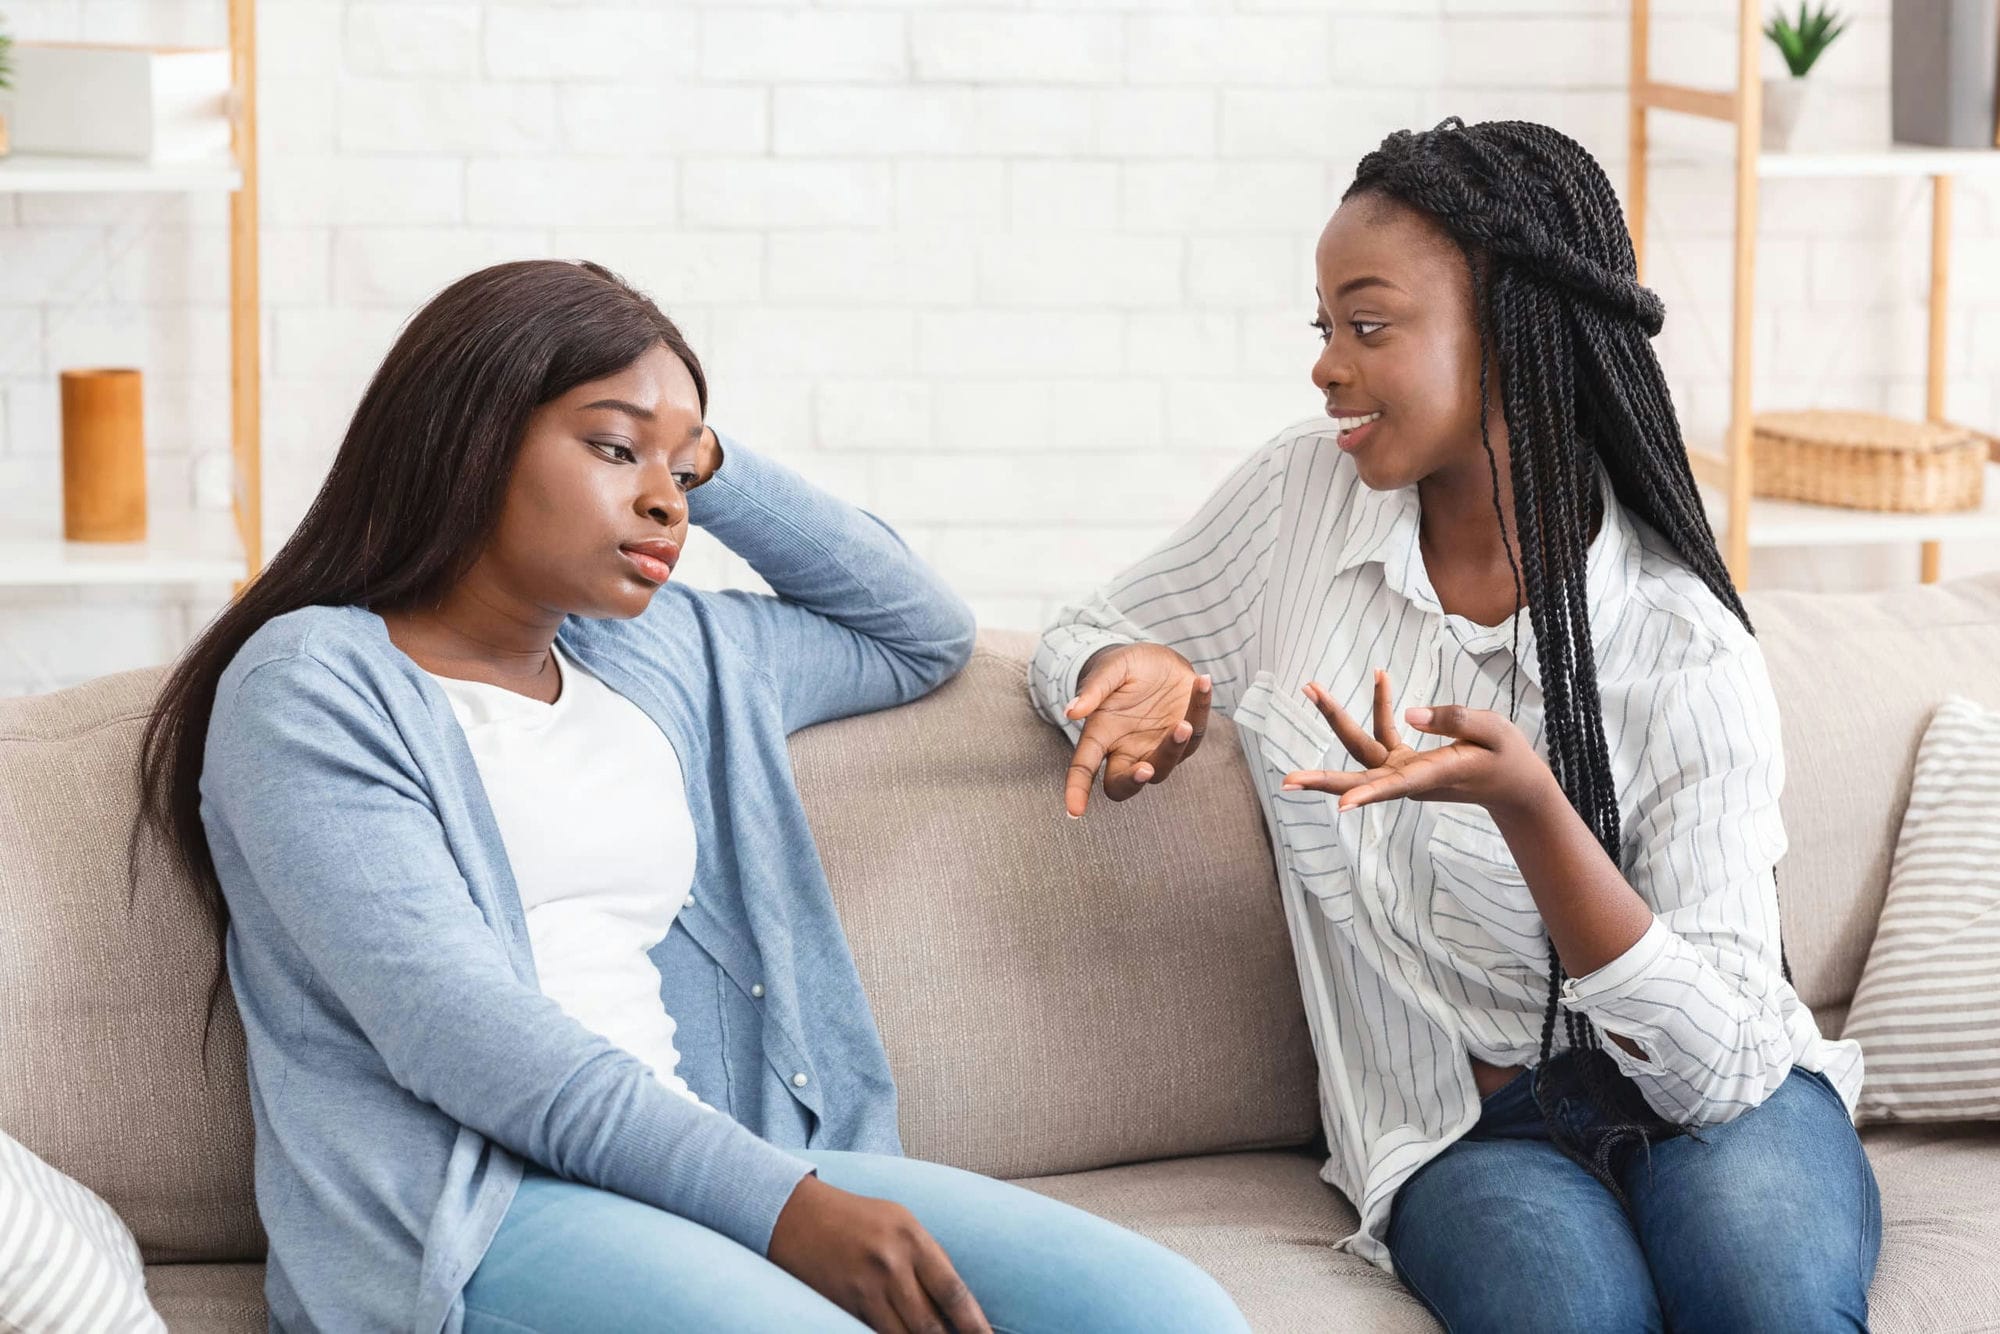 Talkative Friend Concept. Young Black Woman Tired Of Her Girlfriend